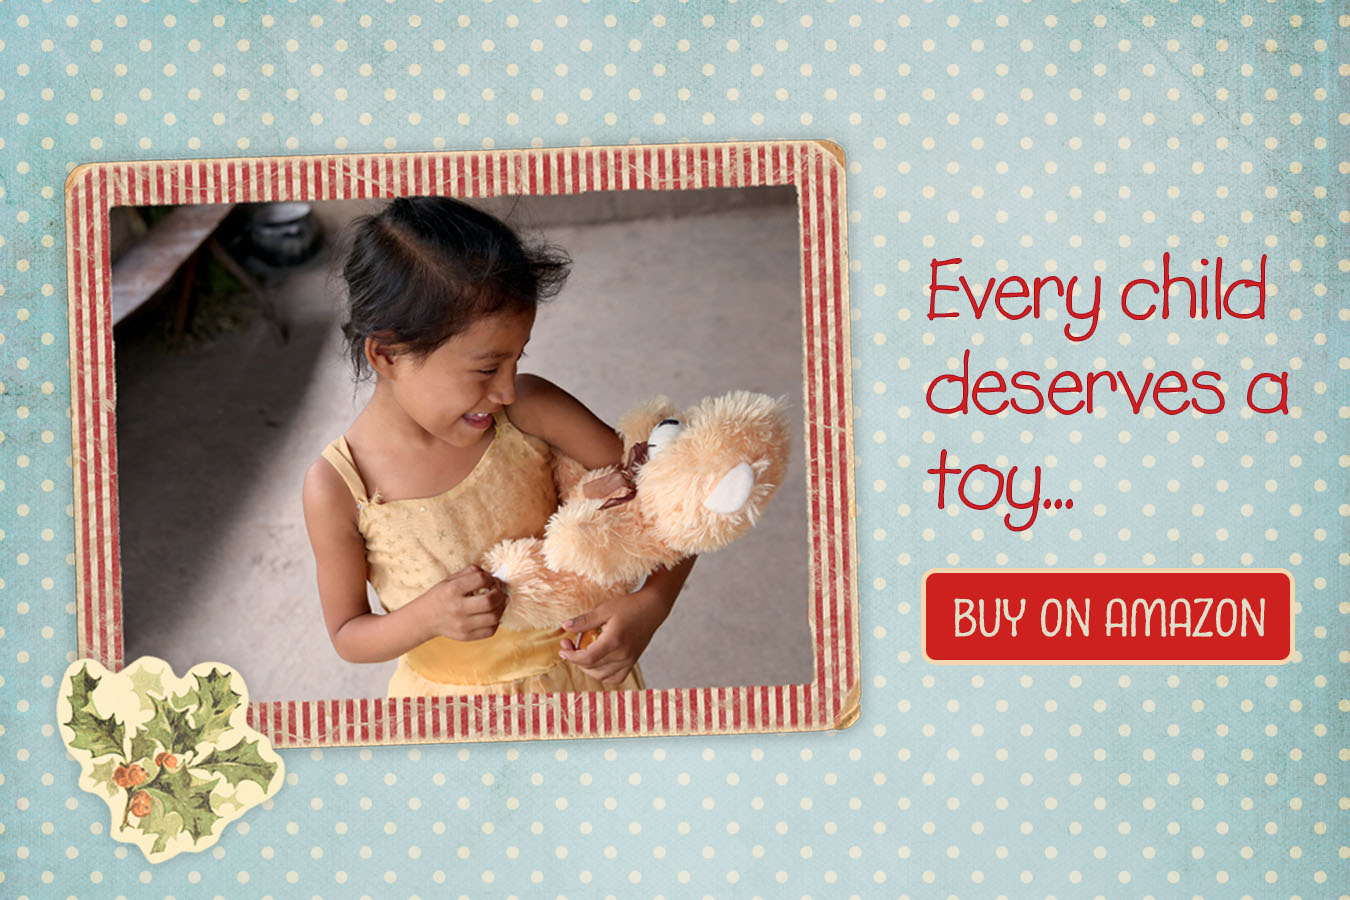 Every Child Deserves a Toy!